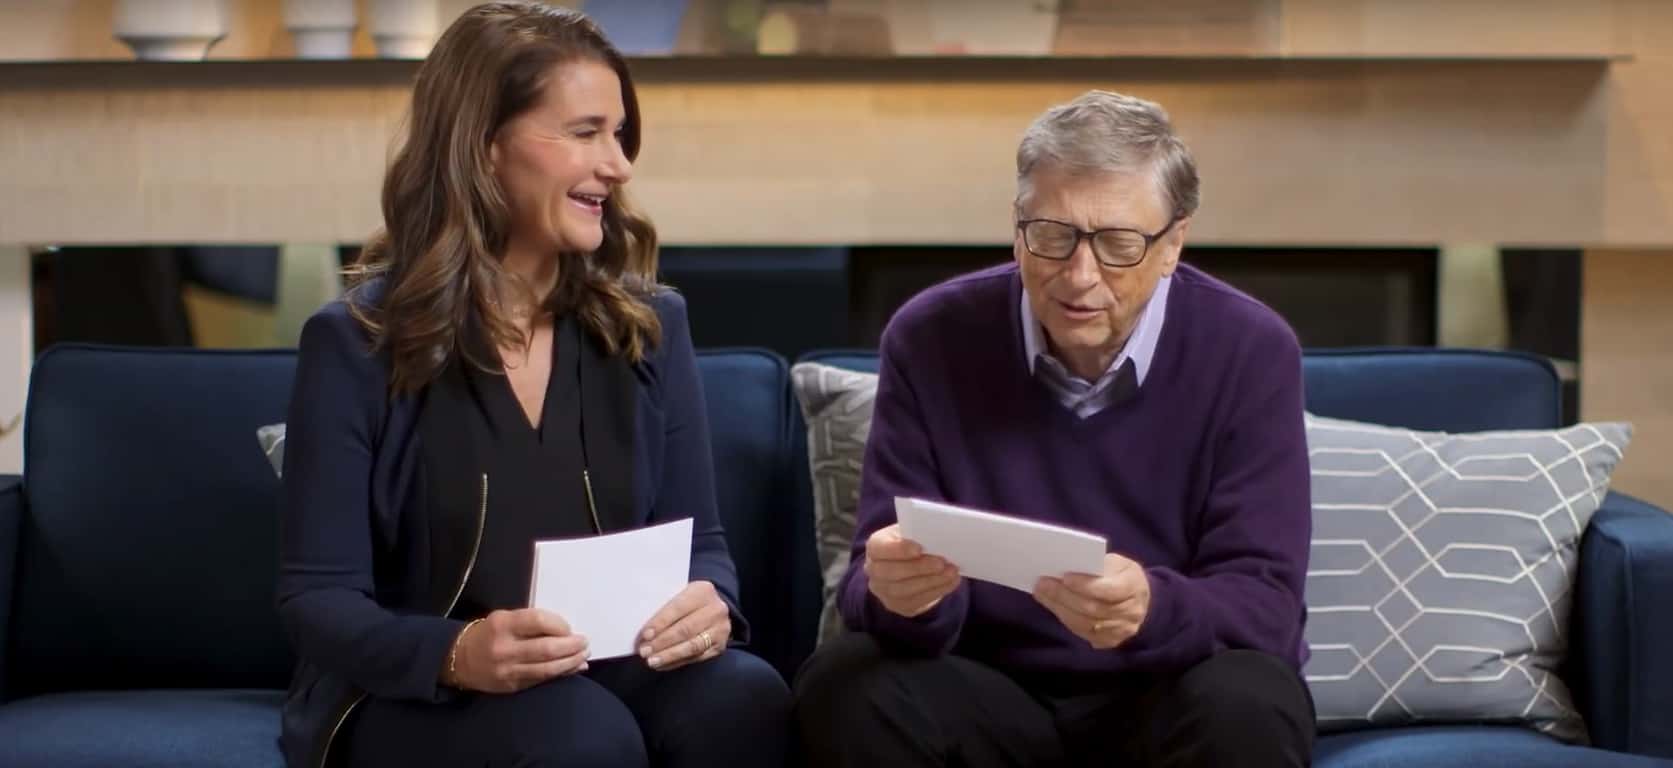 Bill and Melinda Gates take on the "tough questions" about their foundation - OnMSFT.com - February 13, 2018